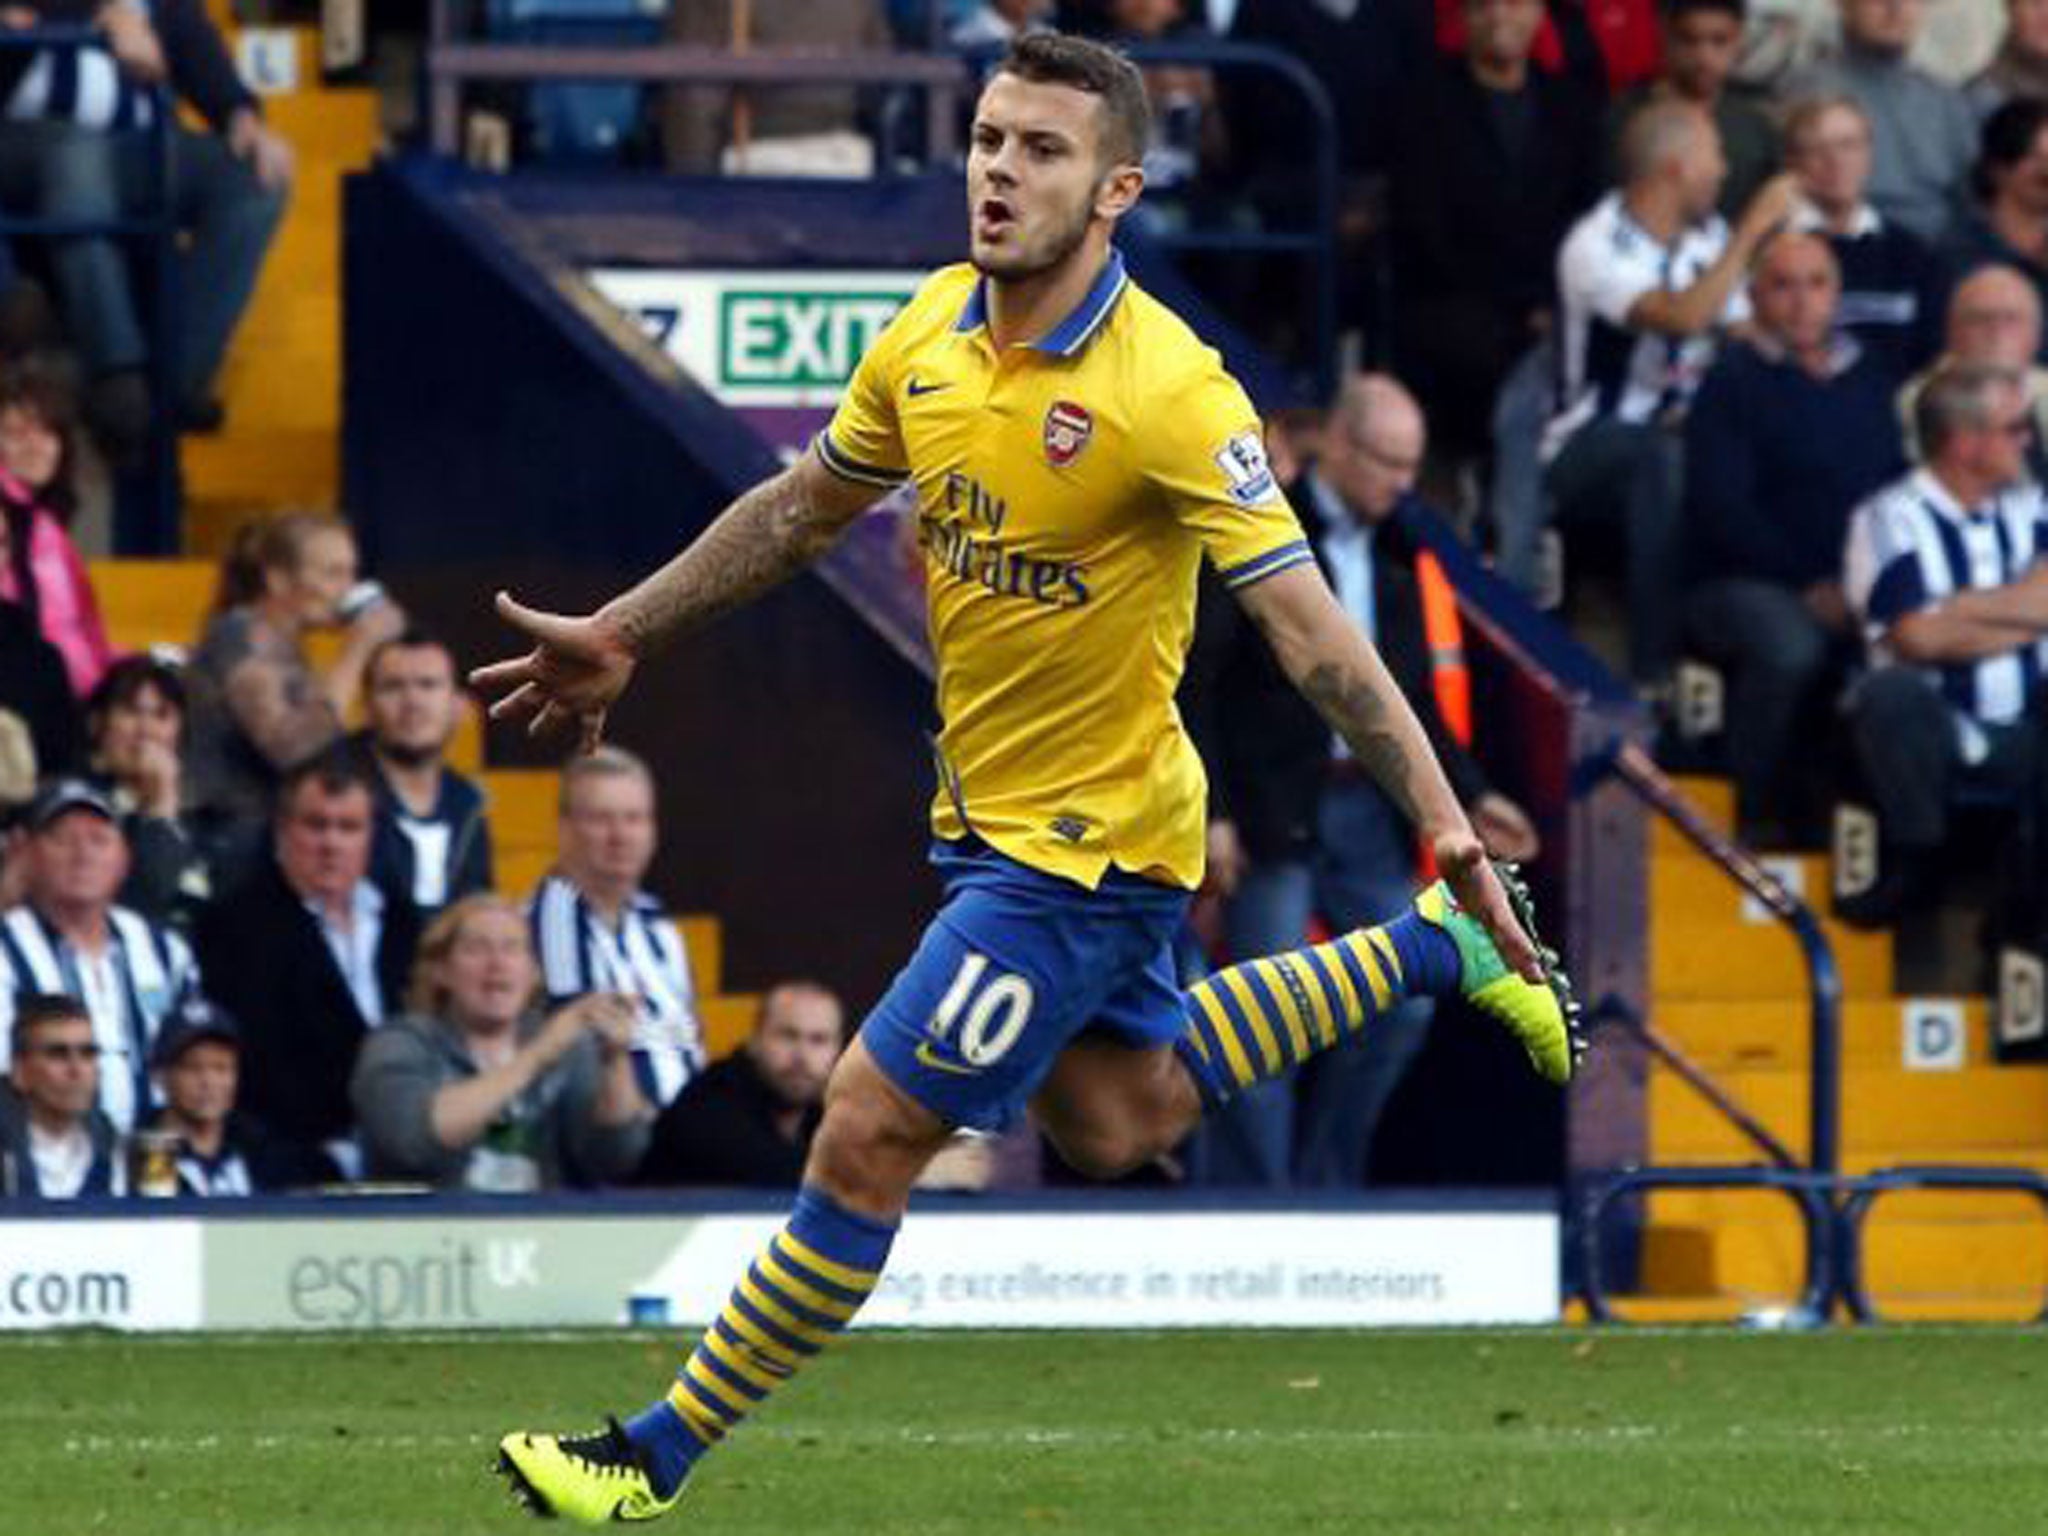 Jack Wilshere celebrates his goal for Arsenal against West Brom on Sunday